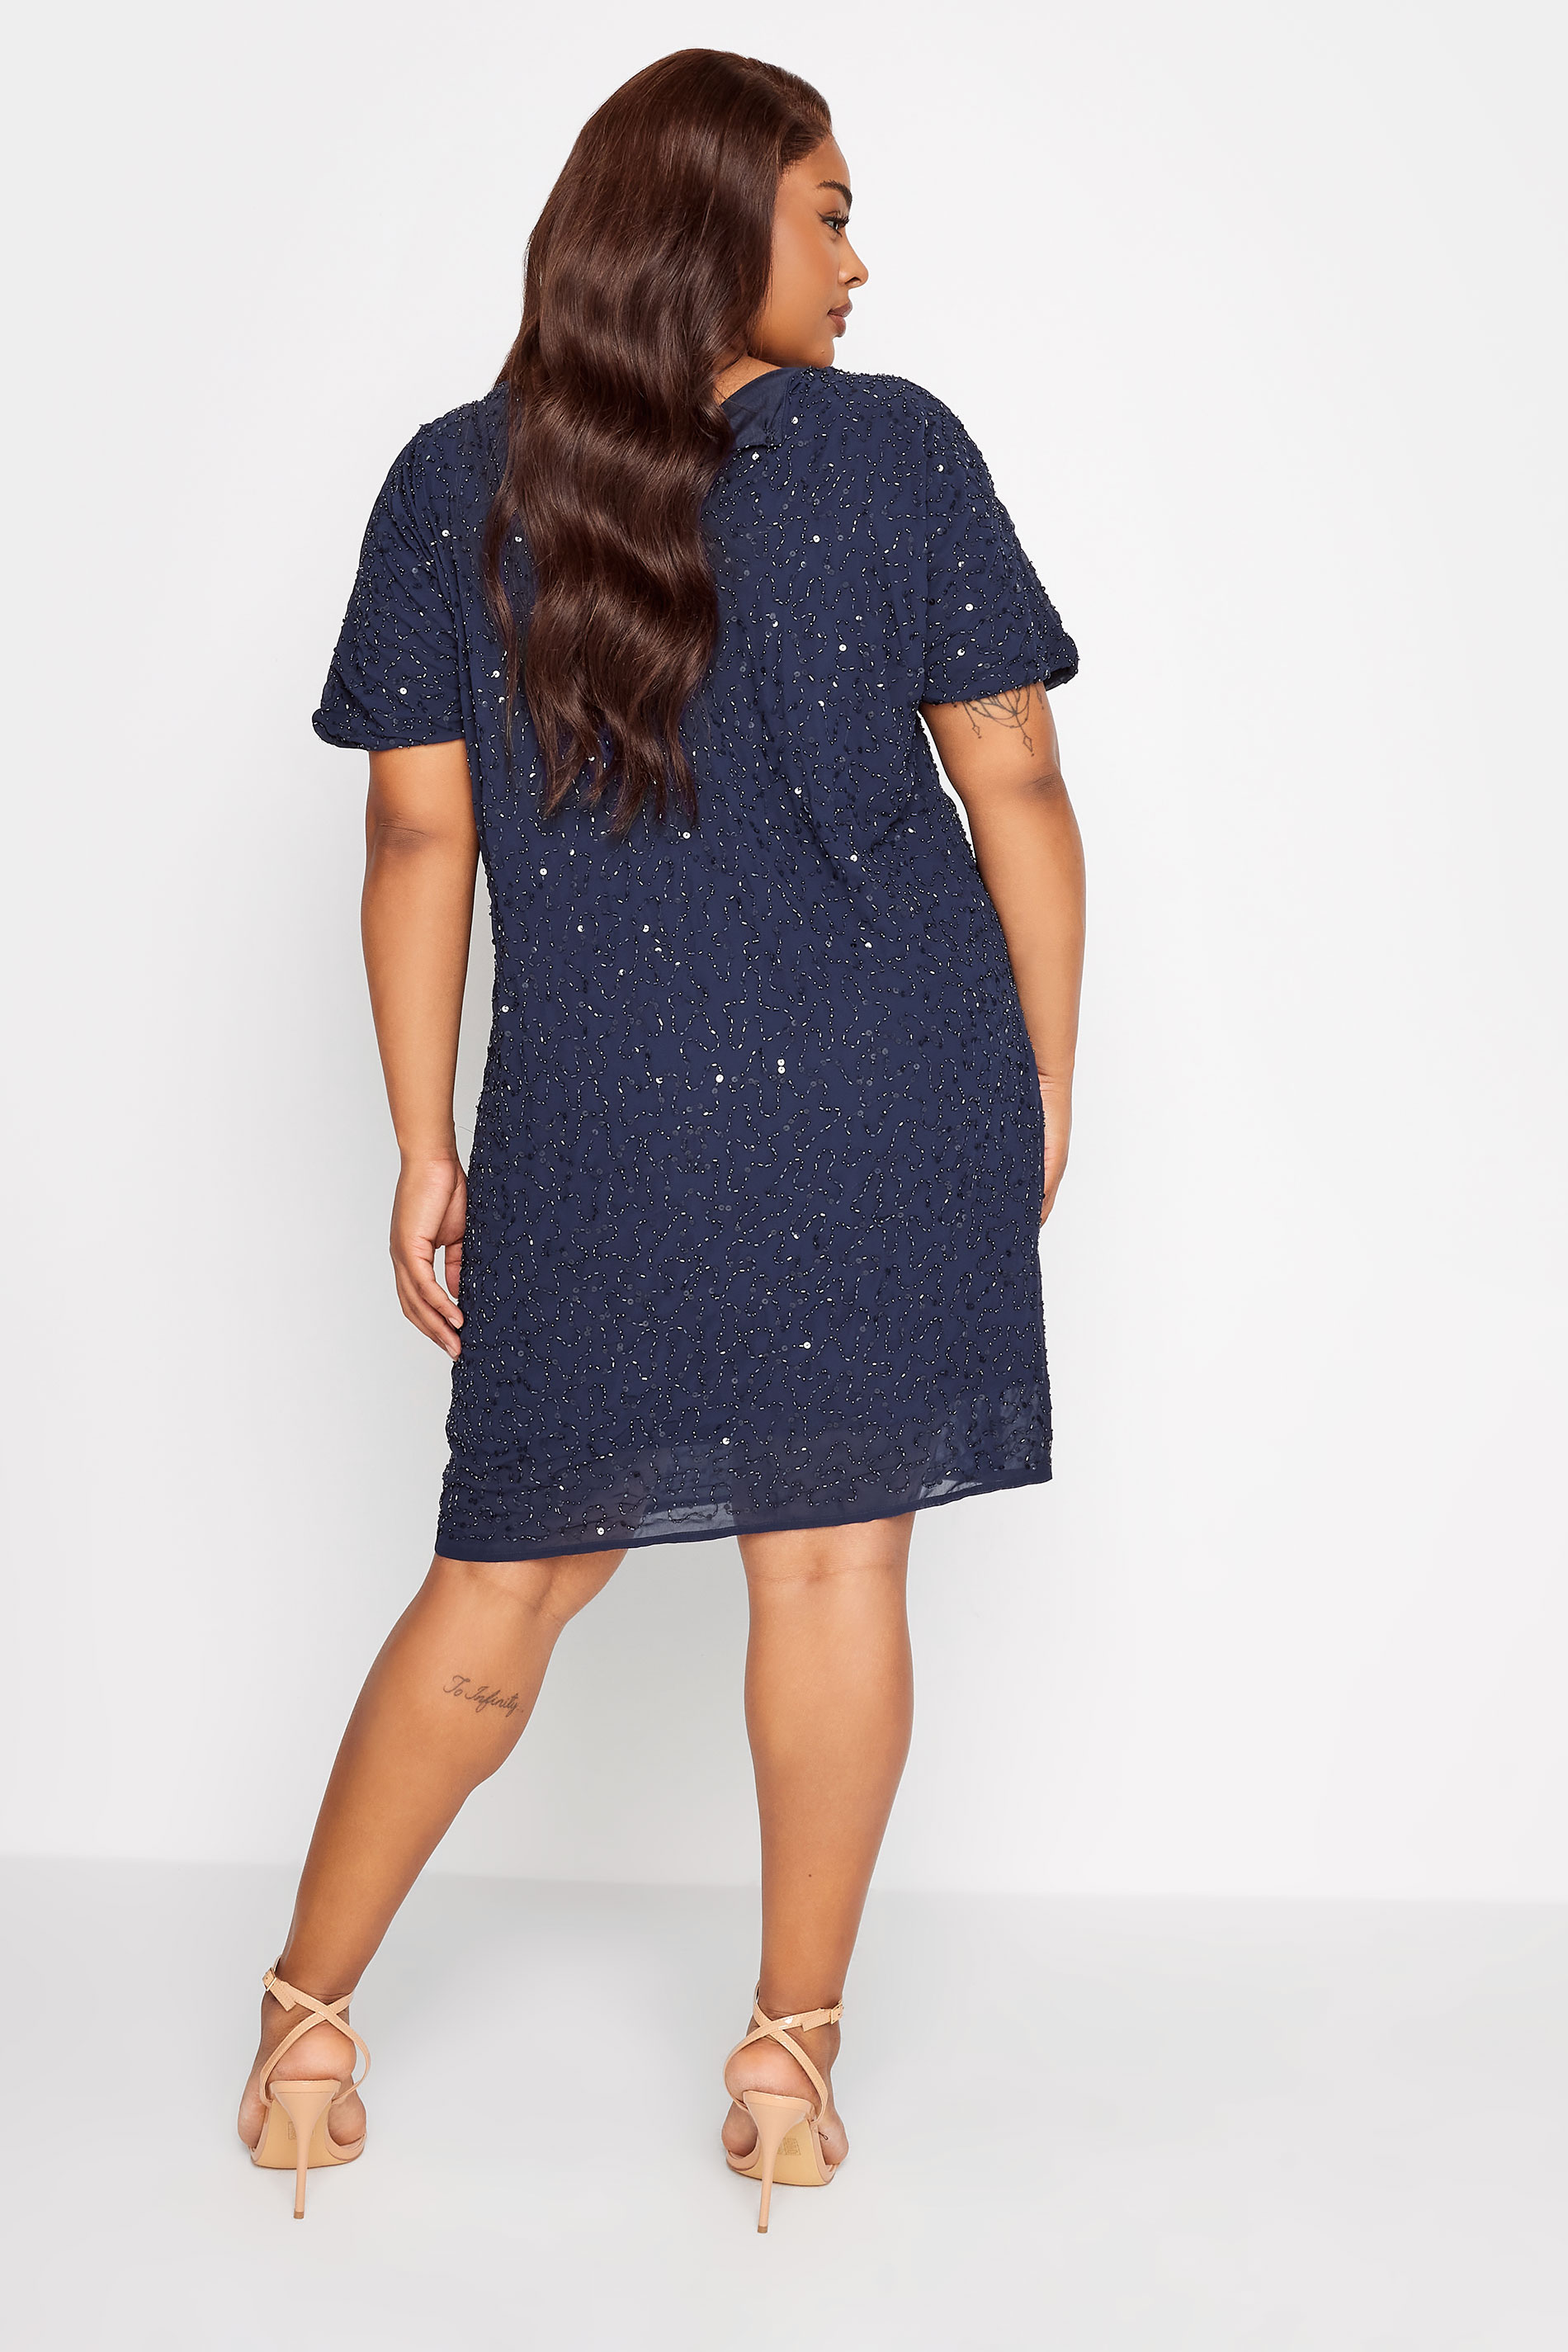 LUXE Plus Size Blue Sequin Hand Embellished Cape Dress | Yours Clothing 3